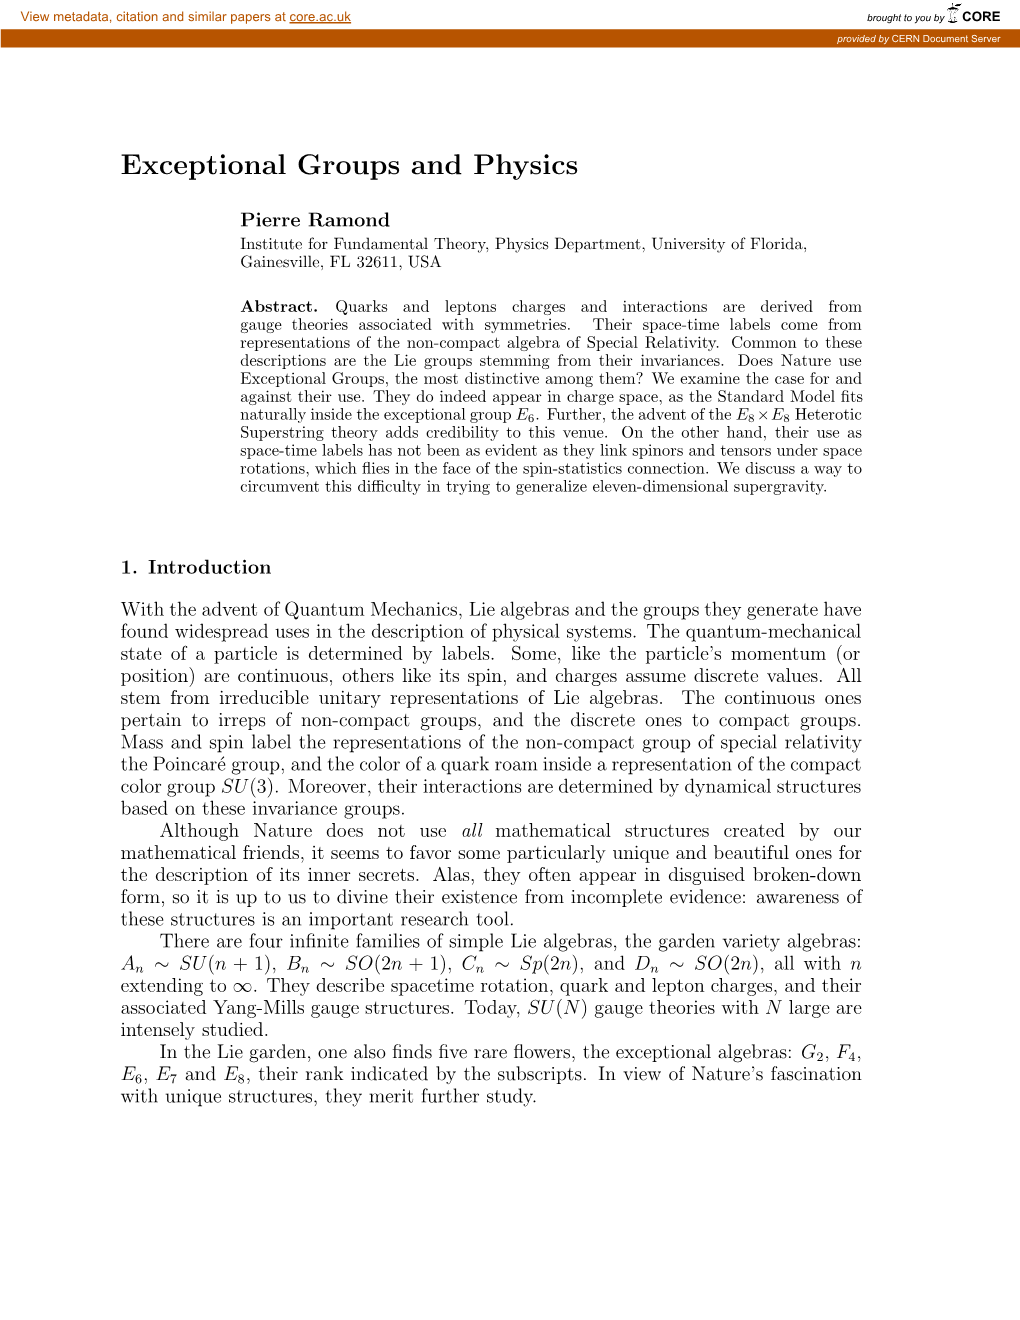 Exceptional Groups and Physics